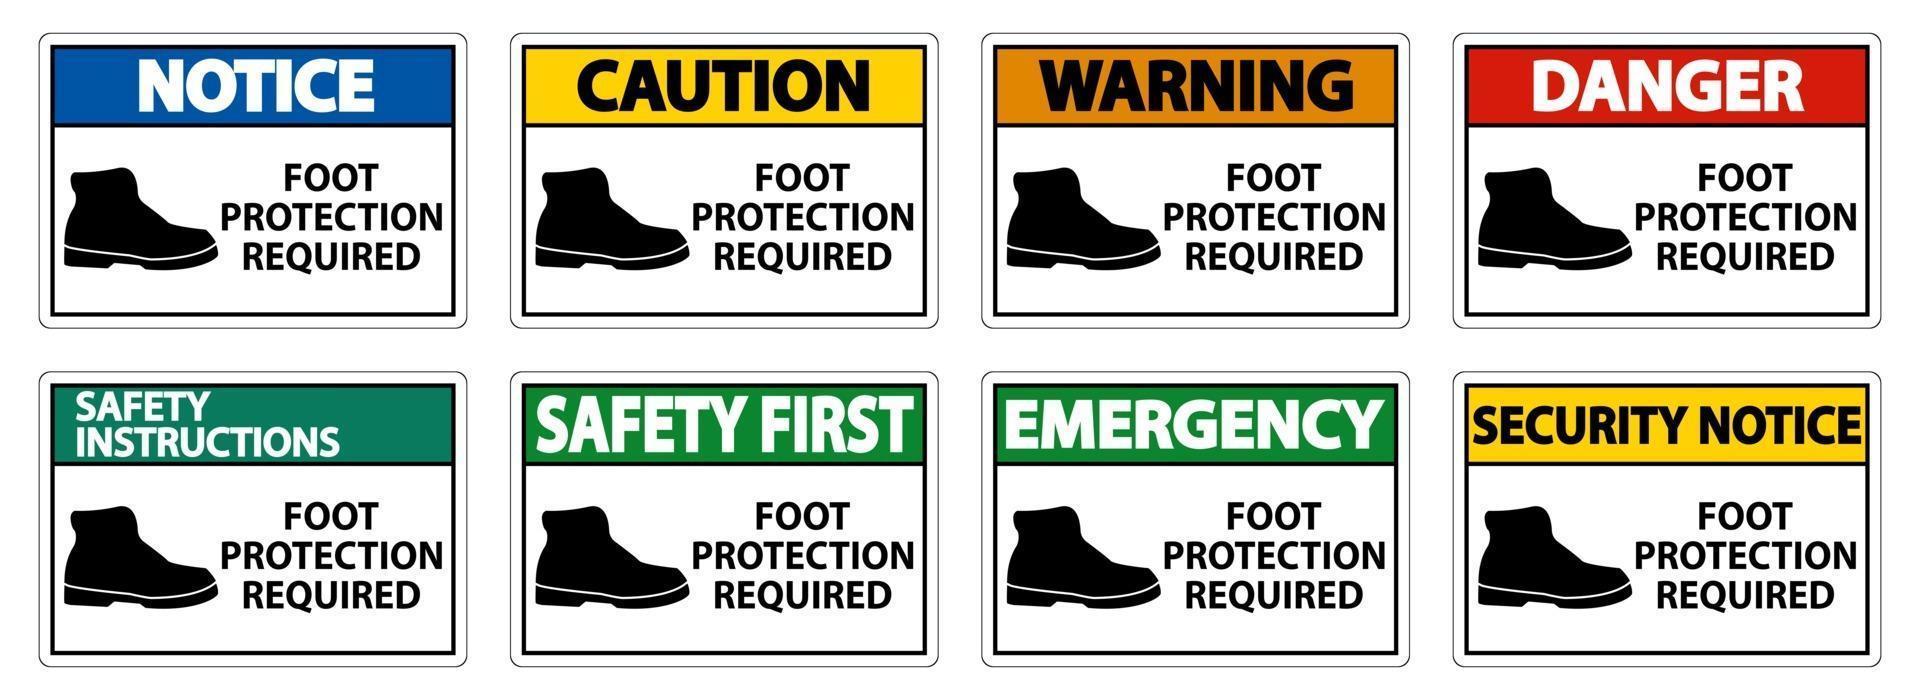 Foot Protection Required Wall Symbol Sign Isolate on transparent Background,Vector Illustration vector